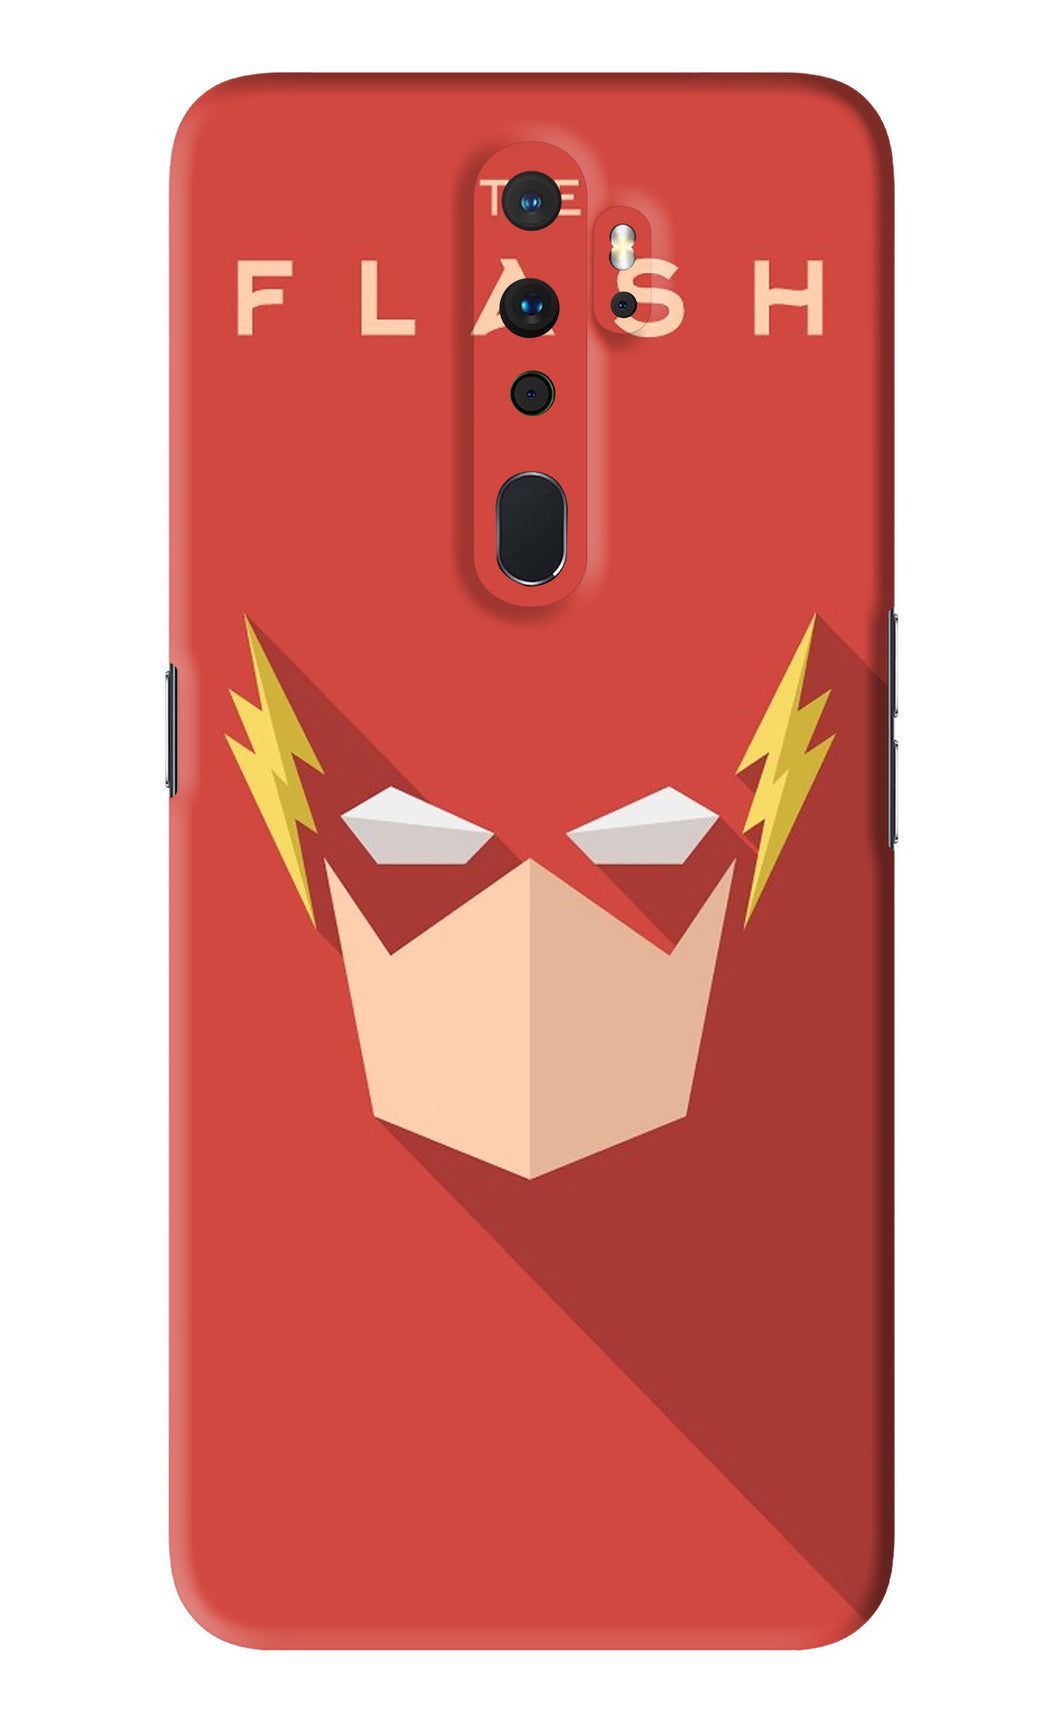 The Flash Oppo A9 2020 Back Skin Wrap